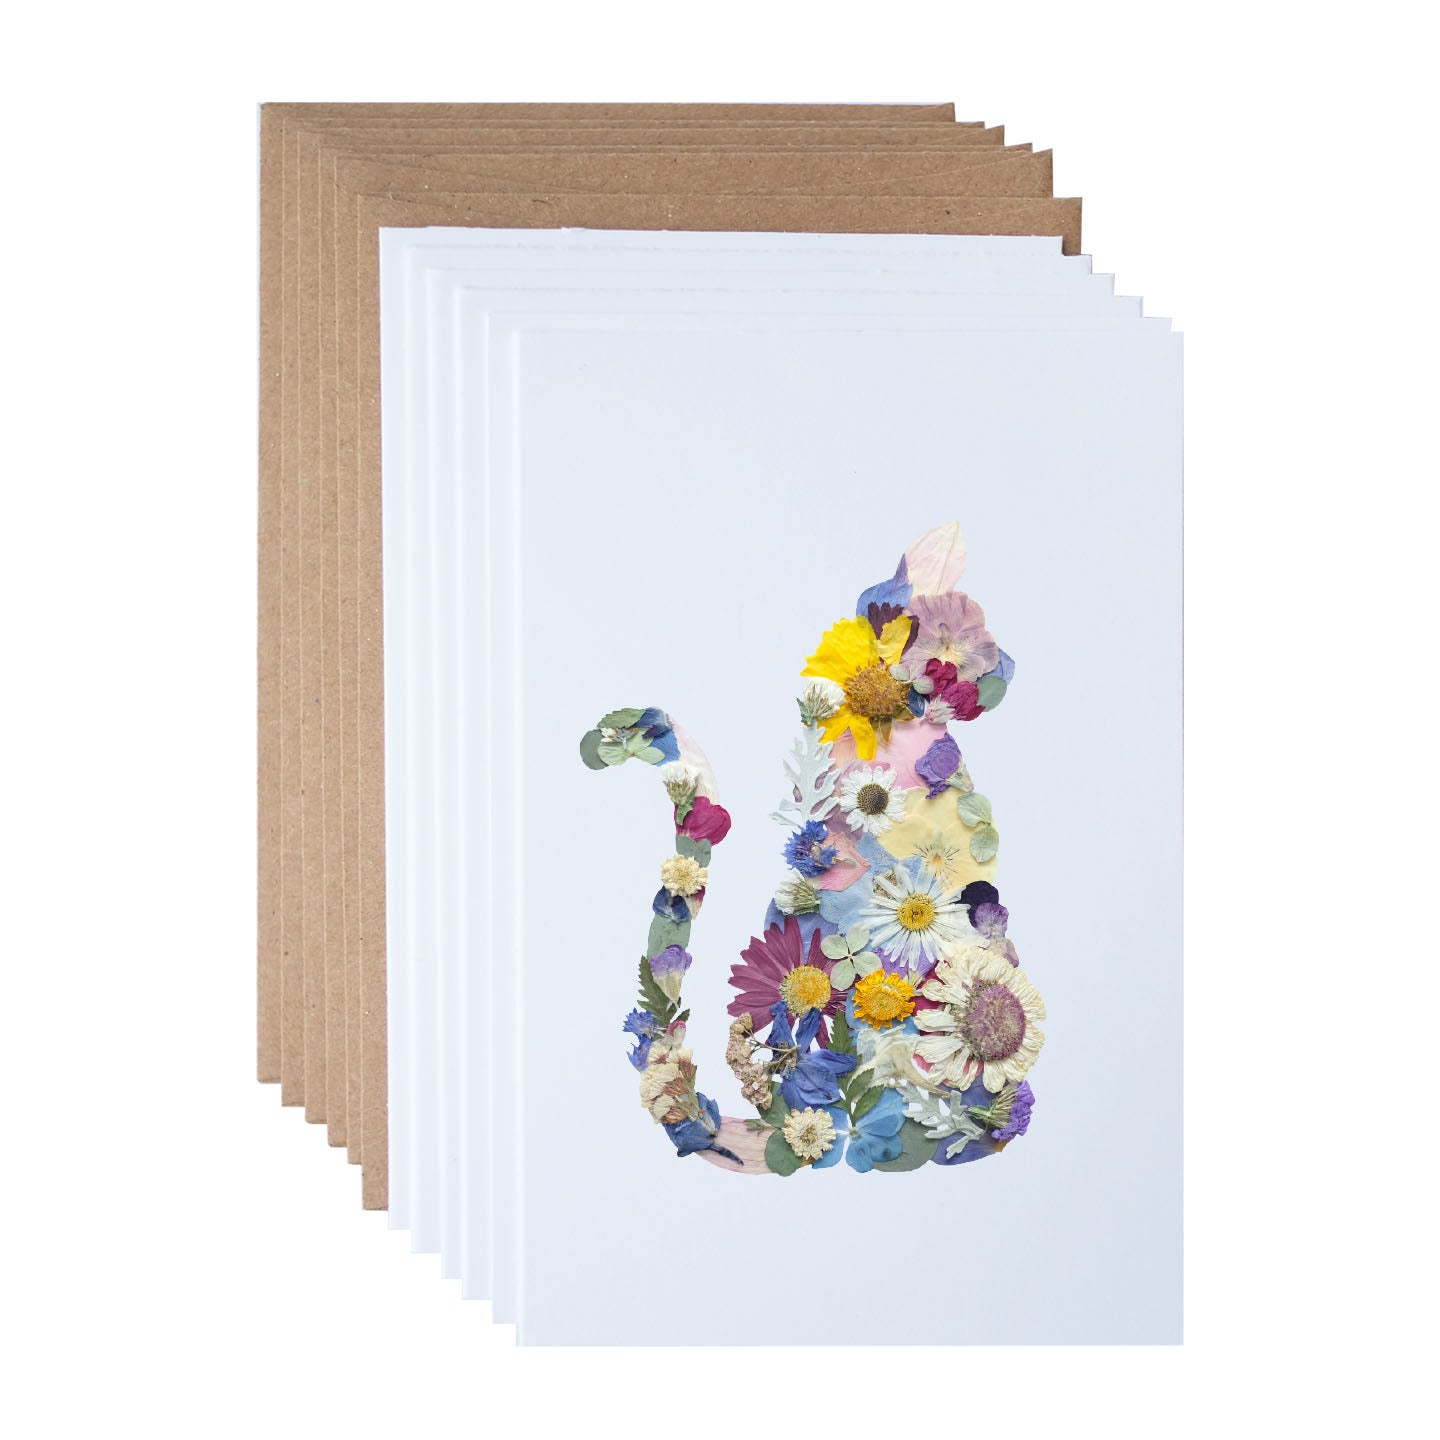 pressed flower cat note card set with colourful dried flowers arranged in cat silhouette